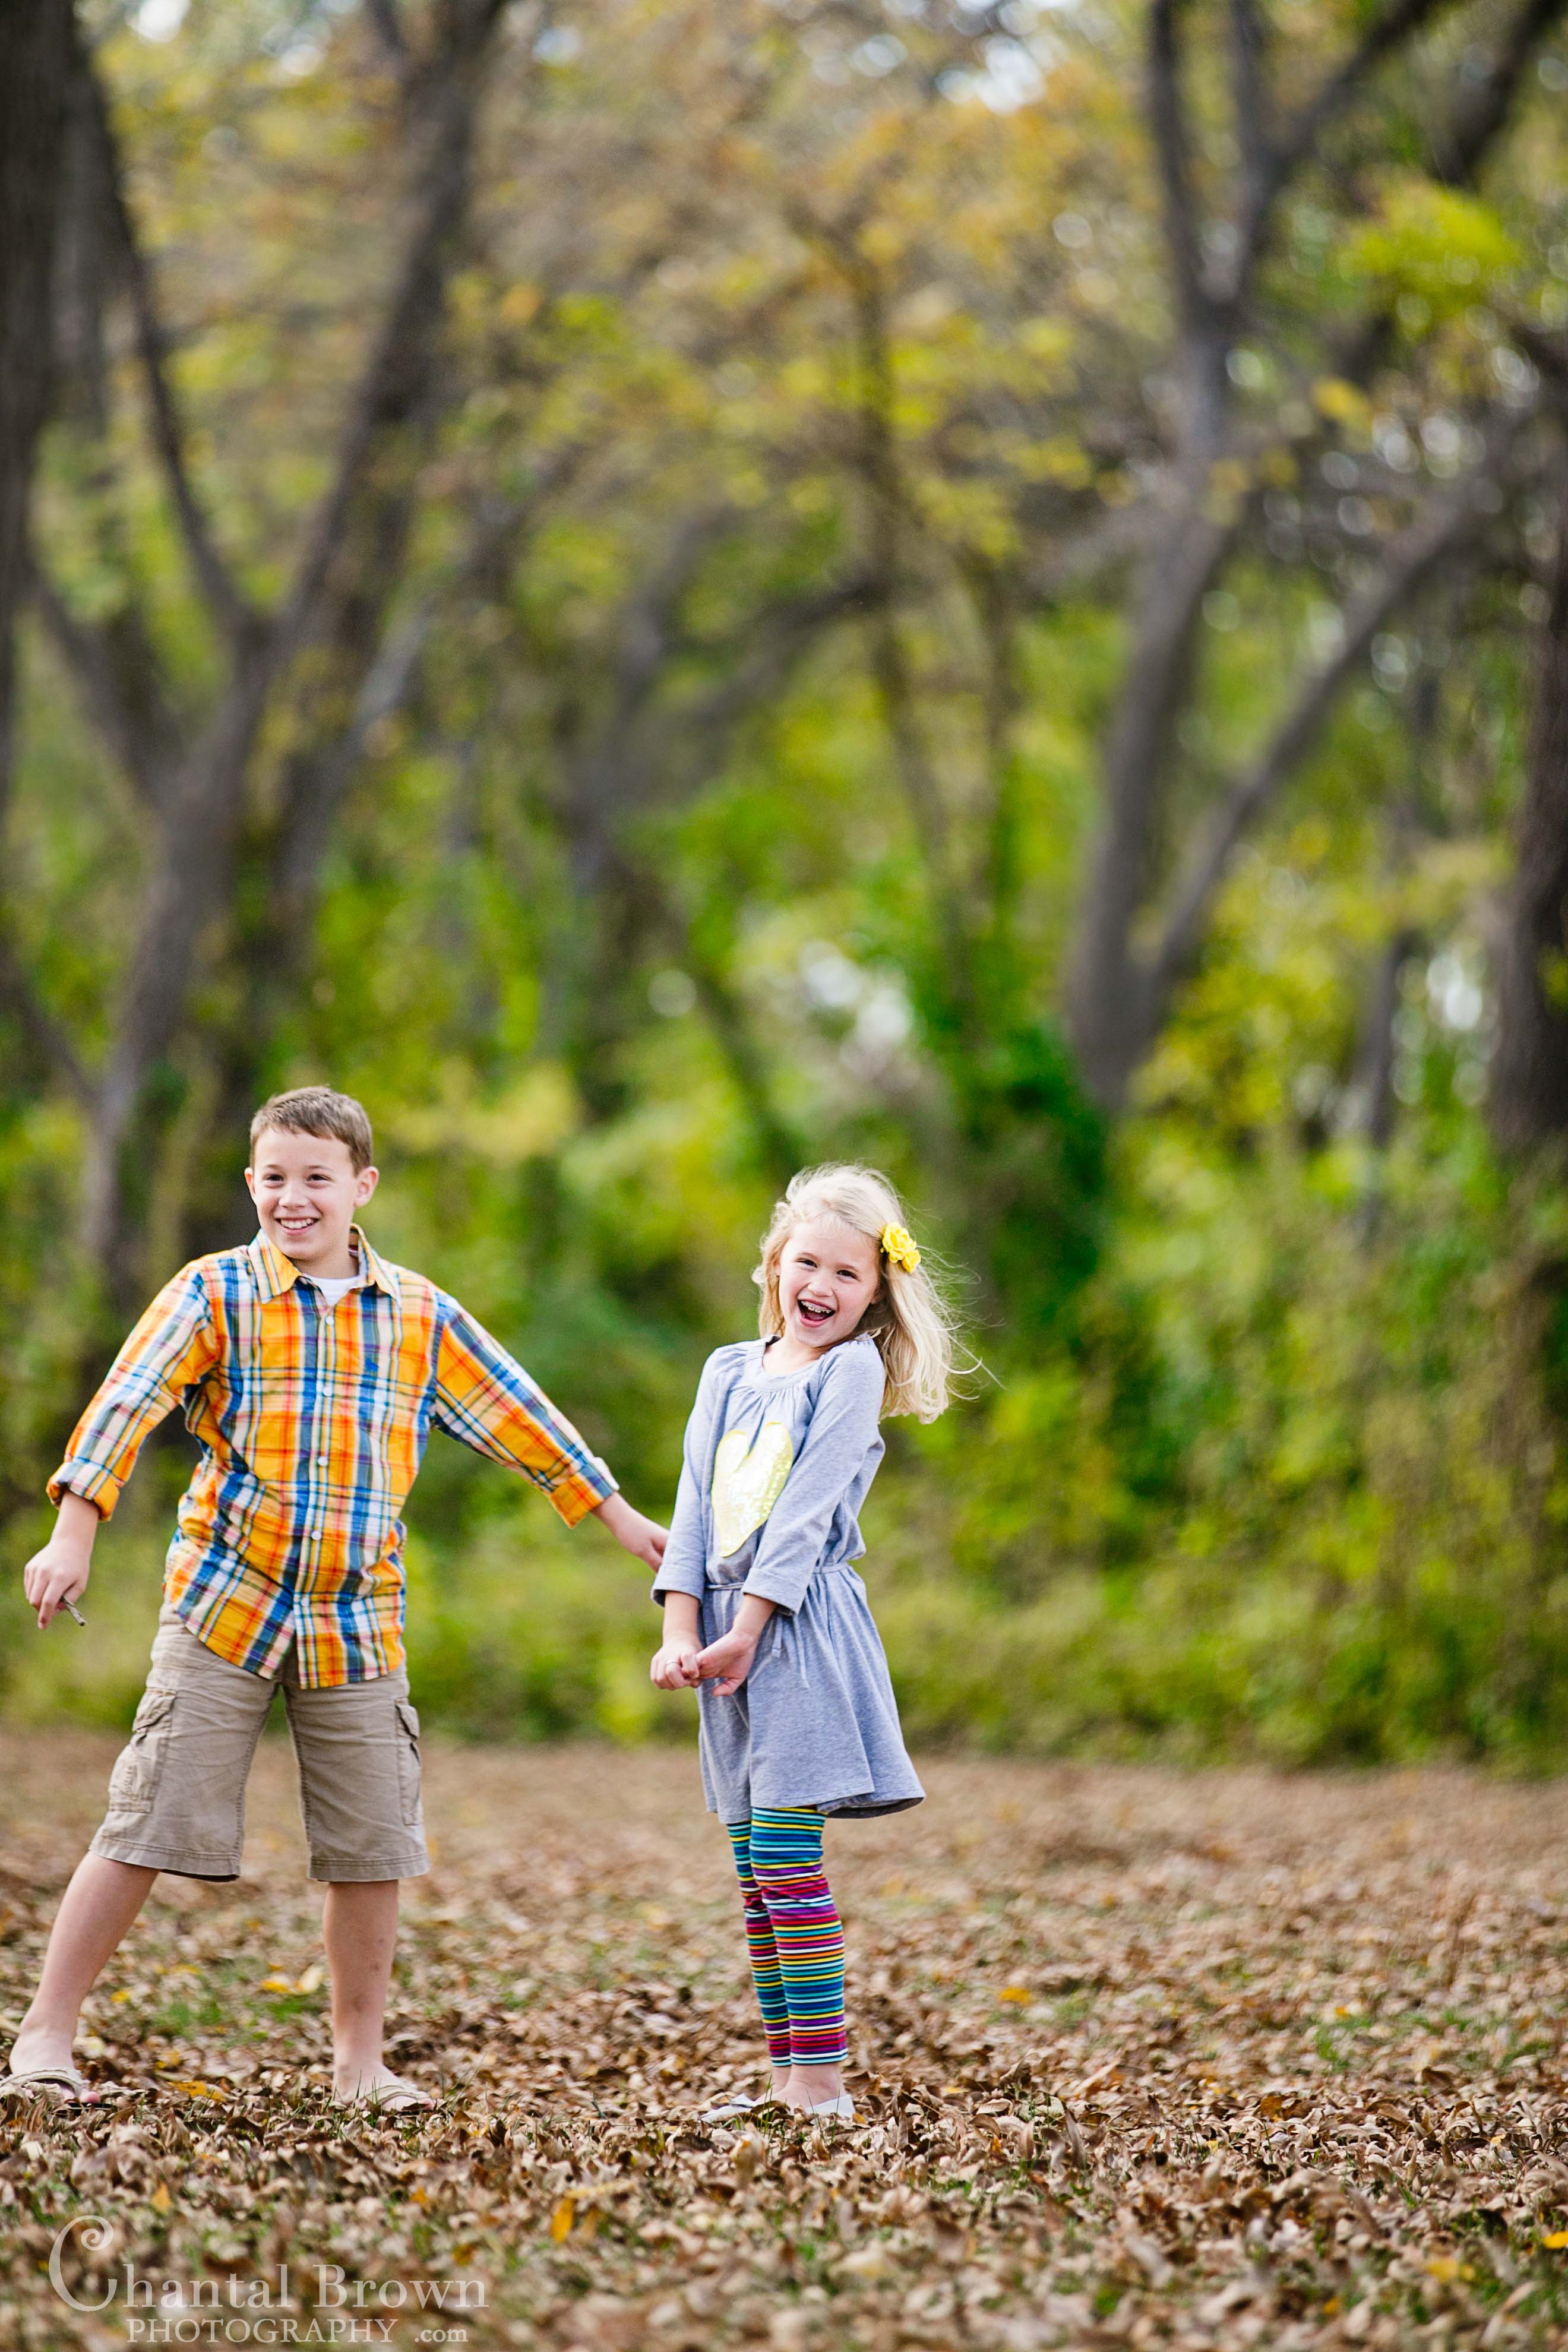 Children portrait photography at Breckinridge Park in Richardson Texas smiling and having a wonderful time playing in fall colors field covered with brown leaves